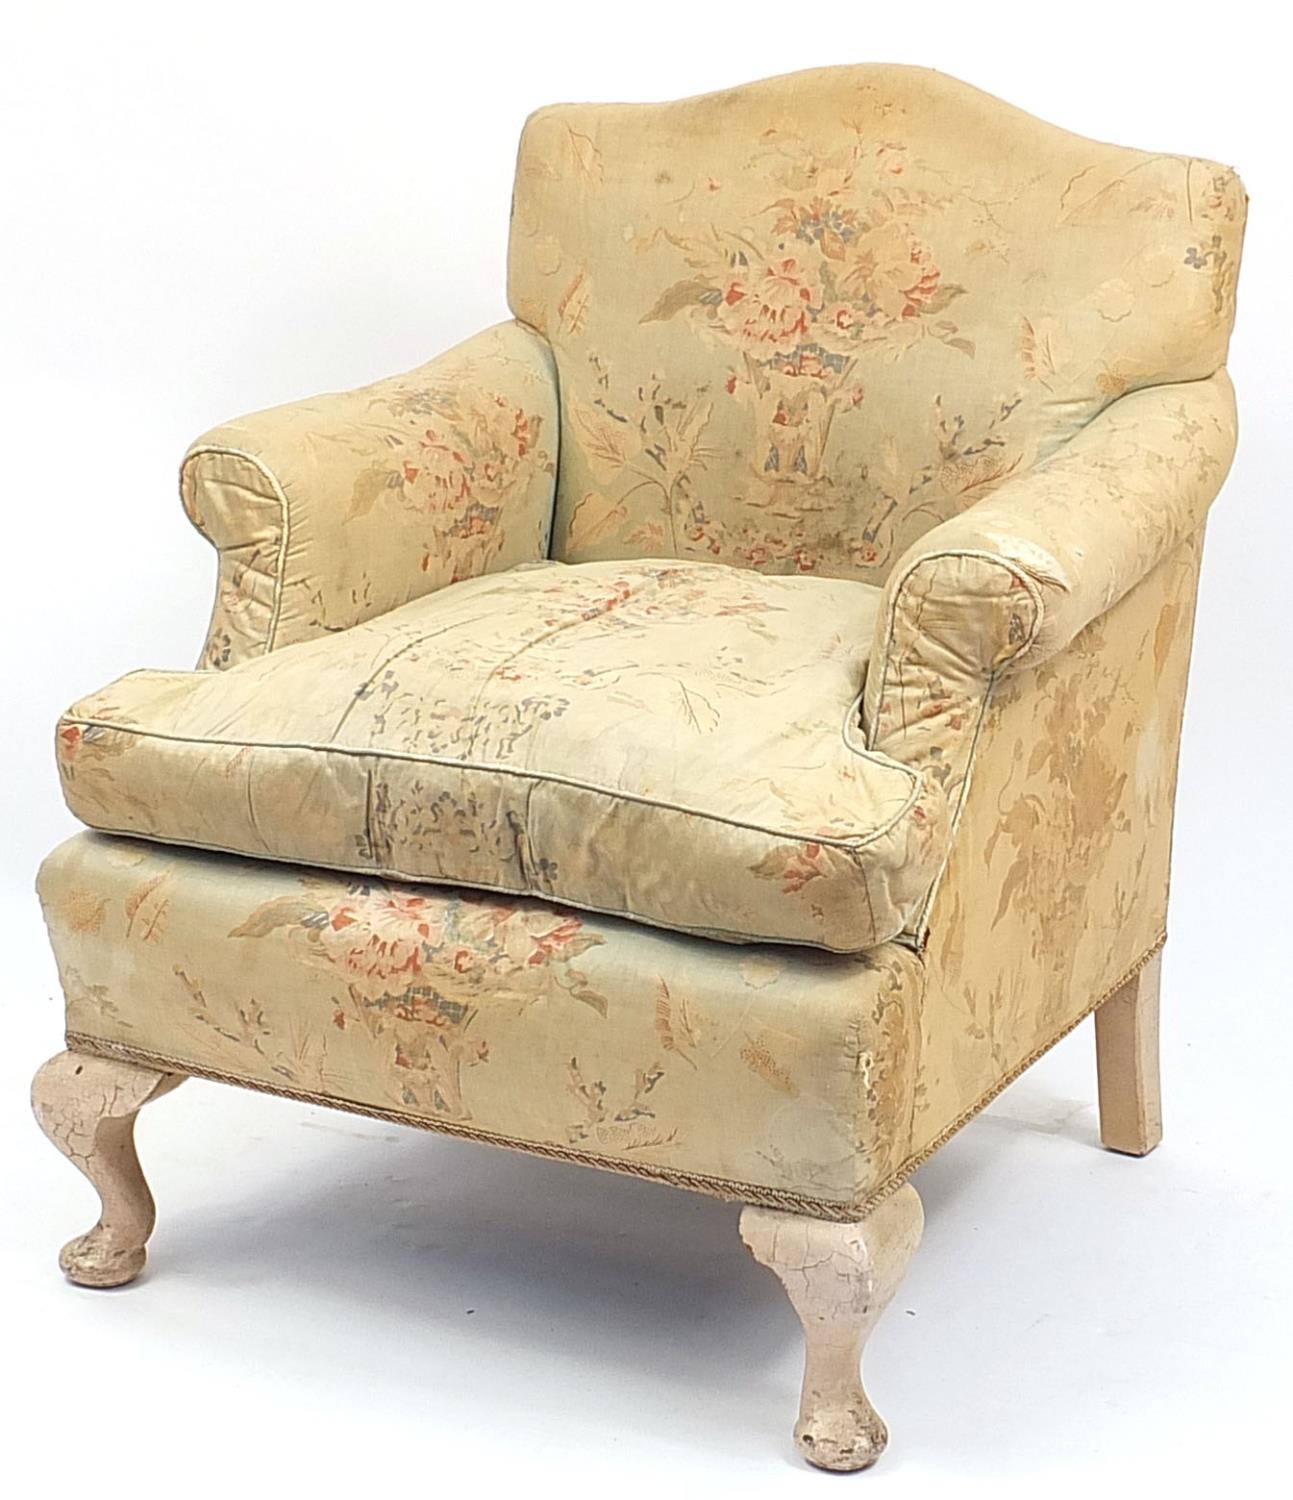 Victorian armchair with floral upholstery, 85cm high